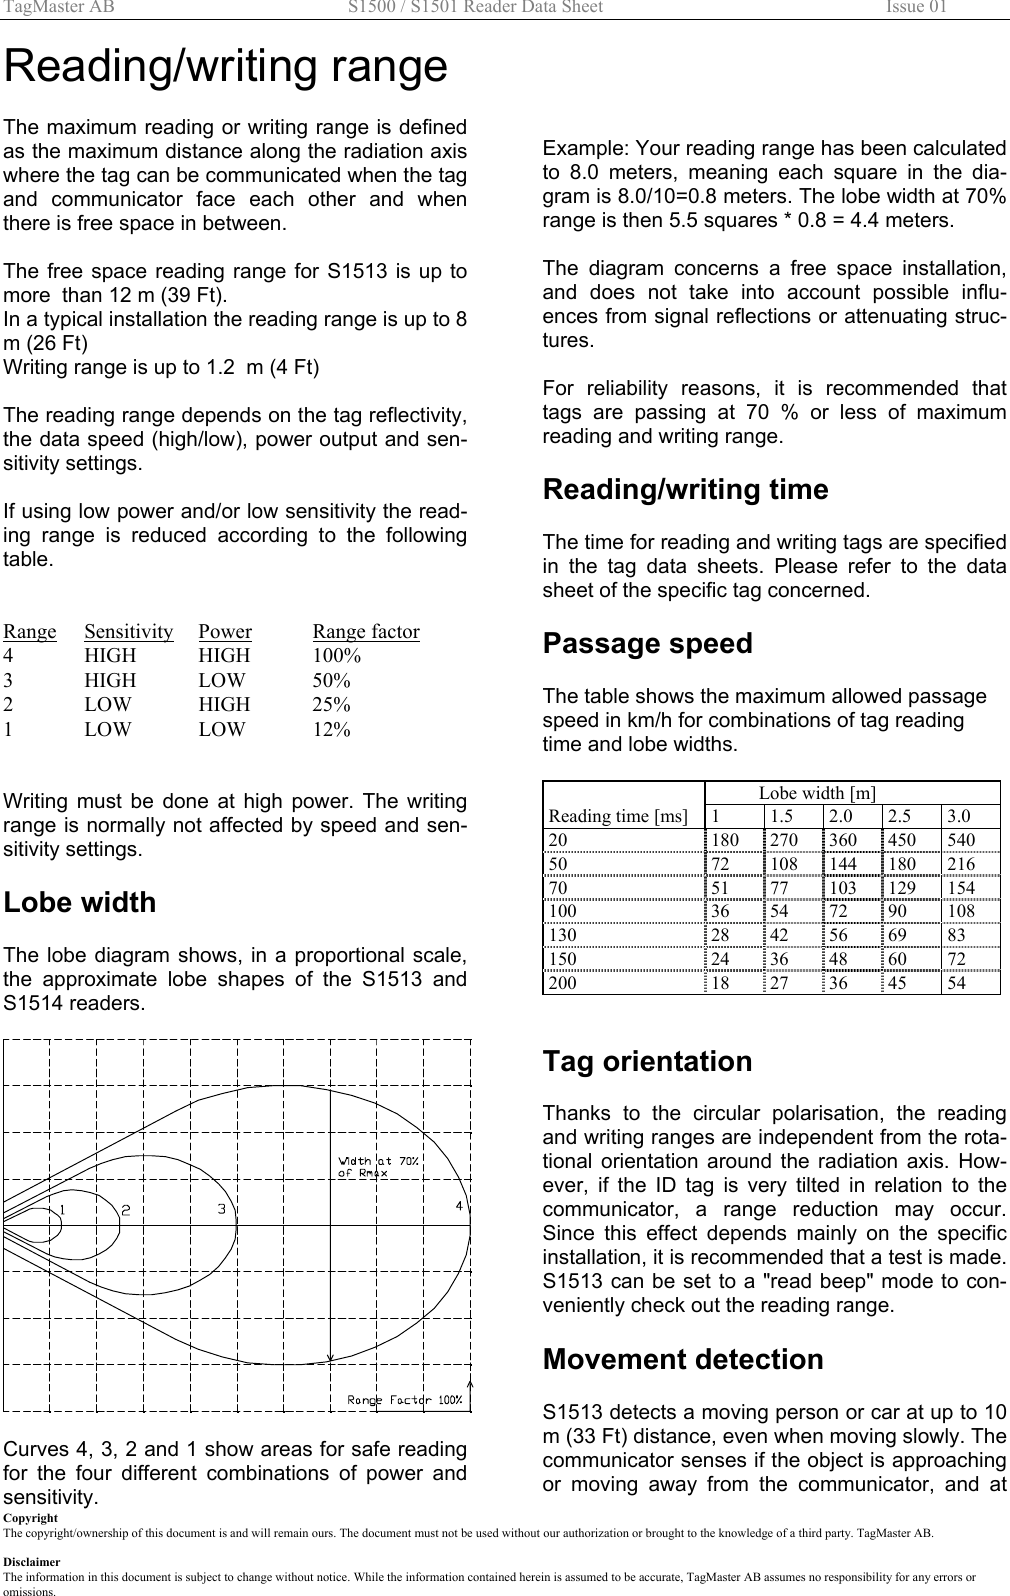 TagMaster AB  S1500 / S1501 Reader Data Sheet        Issue 01 Copyright The copyright/ownership of this document is and will remain ours. The document must not be used without our authorization or brought to the knowledge of a third party. TagMaster AB.  Disclaimer The information in this document is subject to change without notice. While the information contained herein is assumed to be accurate, TagMaster AB assumes no responsibility for any errors or omissions. Reading/writing range  The maximum reading or writing range is defined as the maximum distance along the radiation axis where the tag can be communicated when the tag and communicator face each other and when there is free space in between.  The free space reading range for S1513 is up to more  than 12 m (39 Ft). In a typical installation the reading range is up to 8 m (26 Ft) Writing range is up to 1.2  m (4 Ft)  The reading range depends on the tag reflectivity, the data speed (high/low), power output and sen-sitivity settings.   If using low power and/or low sensitivity the read-ing range is reduced according to the following table.   Range Sensitivity Power Range factor 4 HIGH HIGH 100% 3 HIGH LOW 50% 2 LOW HIGH 25% 1 LOW LOW 12%   Writing must be done at high power. The writing range is normally not affected by speed and sen-sitivity settings.  Lobe width  The lobe diagram shows, in a proportional scale, the approximate lobe shapes of the S1513 and S1514 readers.    Curves 4, 3, 2 and 1 show areas for safe reading for the four different combinations of power and sensitivity.      Example: Your reading range has been calculated to 8.0 meters, meaning each square in the dia-gram is 8.0/10=0.8 meters. The lobe width at 70% range is then 5.5 squares * 0.8 = 4.4 meters.  The diagram concerns a free space installation, and does not take into account possible influ-ences from signal reflections or attenuating struc-tures.   For reliability reasons, it is recommended that tags are passing at 70 % or less of maximum reading and writing range.  Reading/writing time  The time for reading and writing tags are specified in the tag data sheets. Please refer to the data sheet of the specific tag concerned.  Passage speed  The table shows the maximum allowed passage speed in km/h for combinations of tag reading time and lobe widths.    Lobe width [m]         Reading time [ms]  1  1.5  2.0  2.5  3.0 20  180 270 360 450 540 50 72 108 144 180 216 70 51 77 103 129 154 100  36 54 72 90 108 130  28 42 56 69 83 150  24 36 48 60 72 200  18 27 36 45 54   Tag orientation  Thanks to the circular polarisation, the reading and writing ranges are independent from the rota-tional orientation around the radiation axis. How-ever, if the ID tag is very tilted in relation to the communicator, a range reduction may occur. Since this effect depends mainly on the specific installation, it is recommended that a test is made. S1513 can be set to a &quot;read beep&quot; mode to con-veniently check out the reading range.  Movement detection   S1513 detects a moving person or car at up to 10 m (33 Ft) distance, even when moving slowly. The communicator senses if the object is approaching or moving away from the communicator, and at 